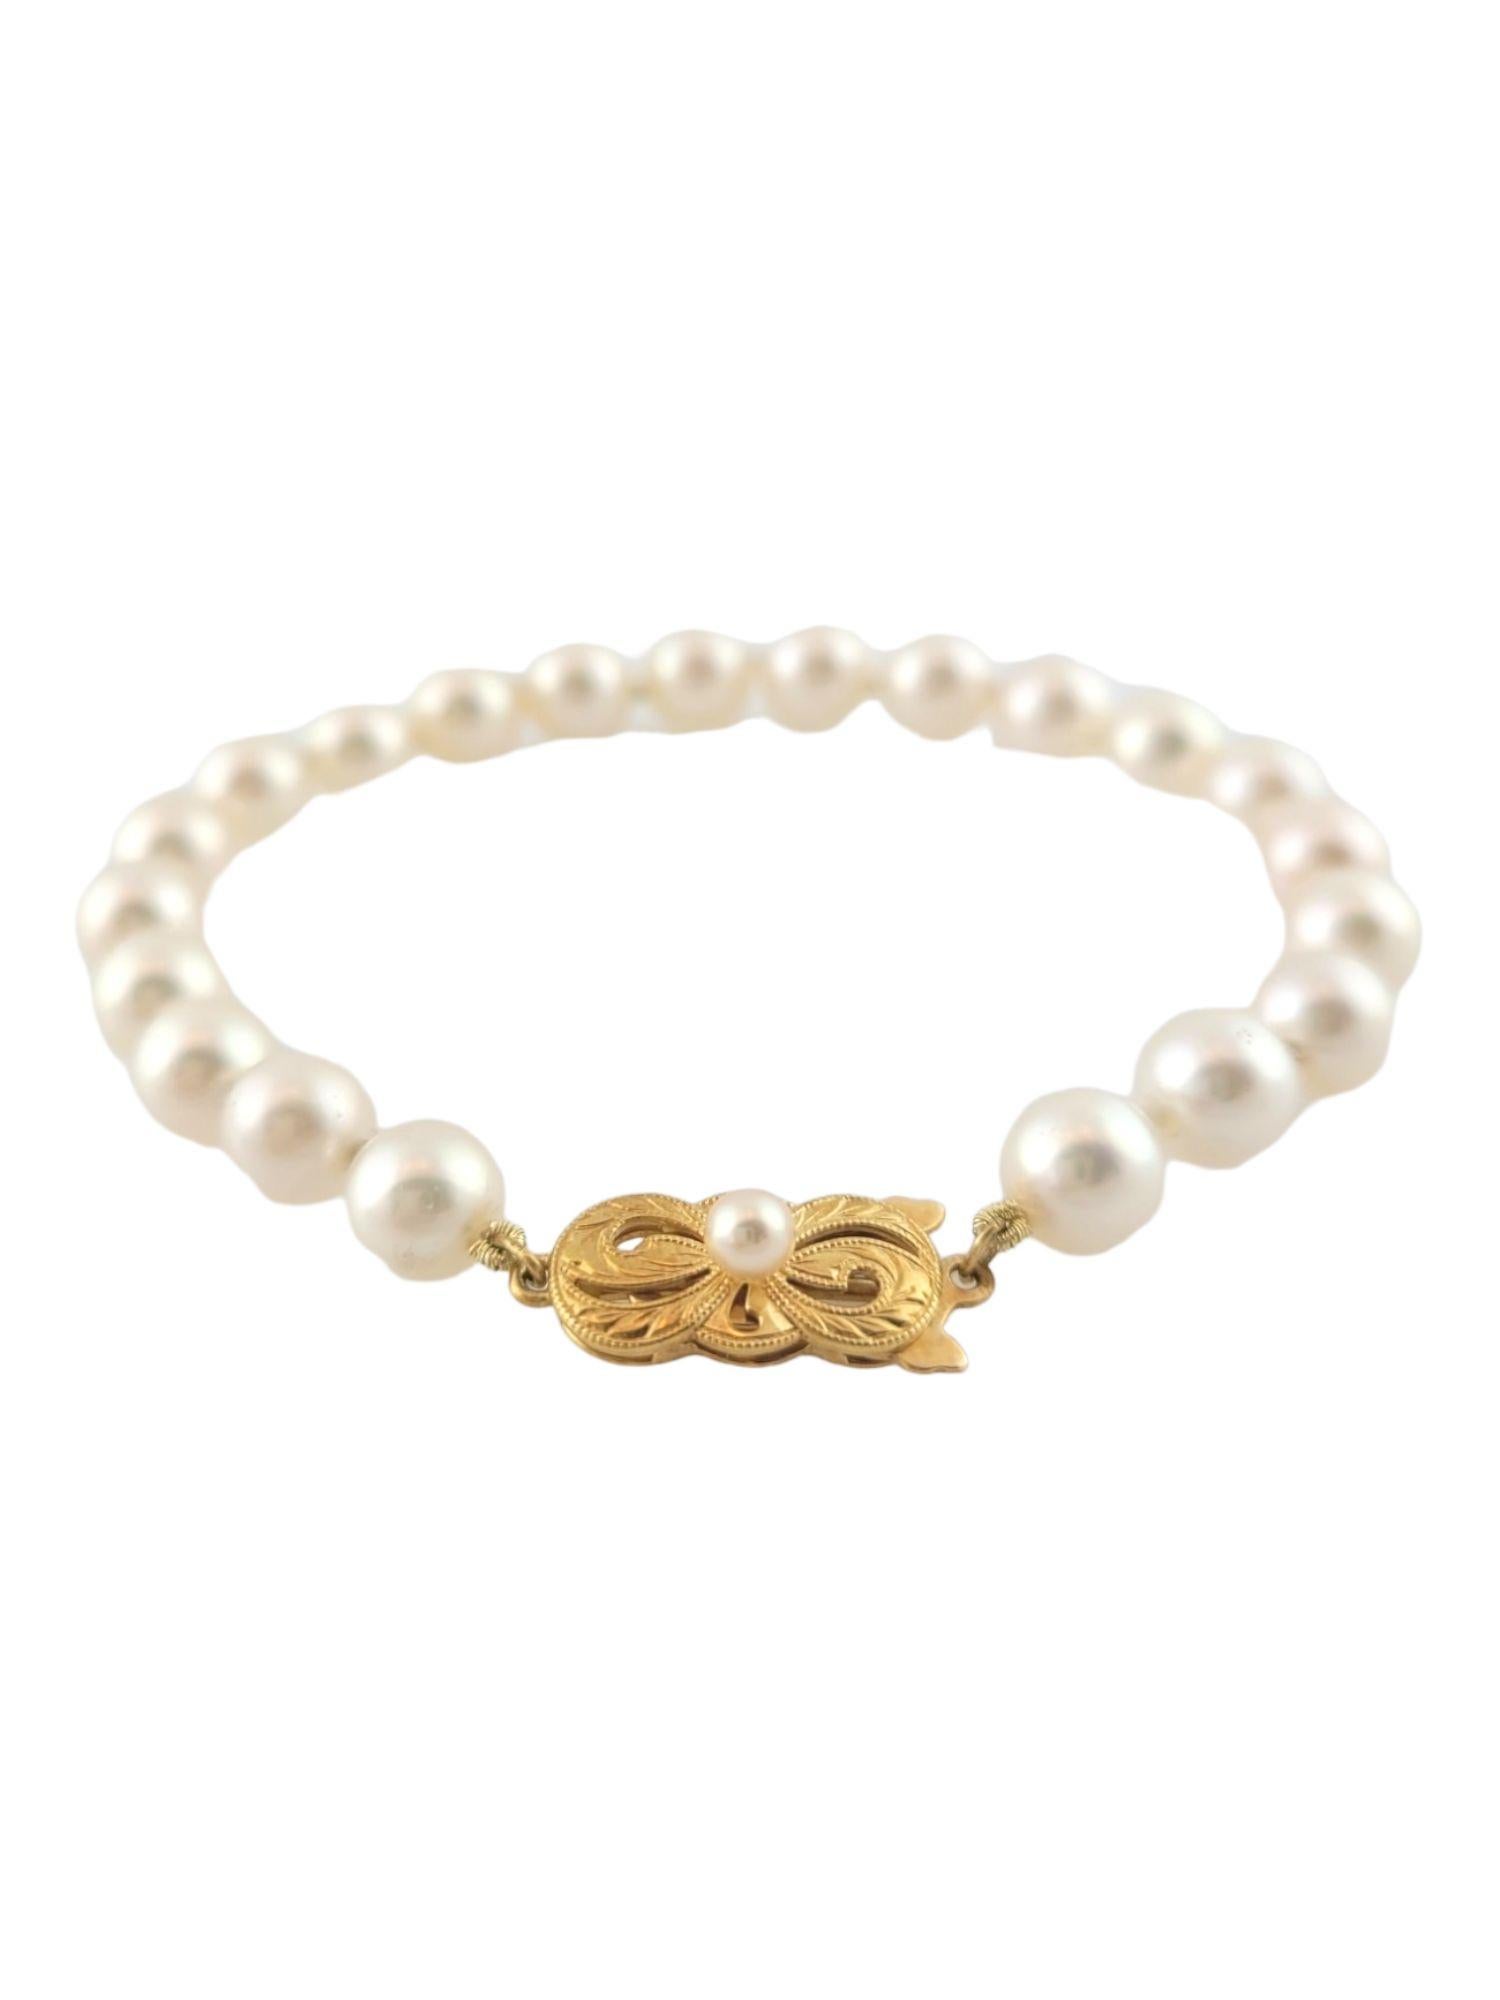 Mikimoto 18K Yellow Gold Cultured Pearl Bracelet

This gorgeous Mikimoto bracelet features 22 gorgeous cultured pearls as well as a beautiful clasp crafted from 18K yellow gold for a stunning finish!

21 7-7.5mm cultured pearls

1 3.7mm accent